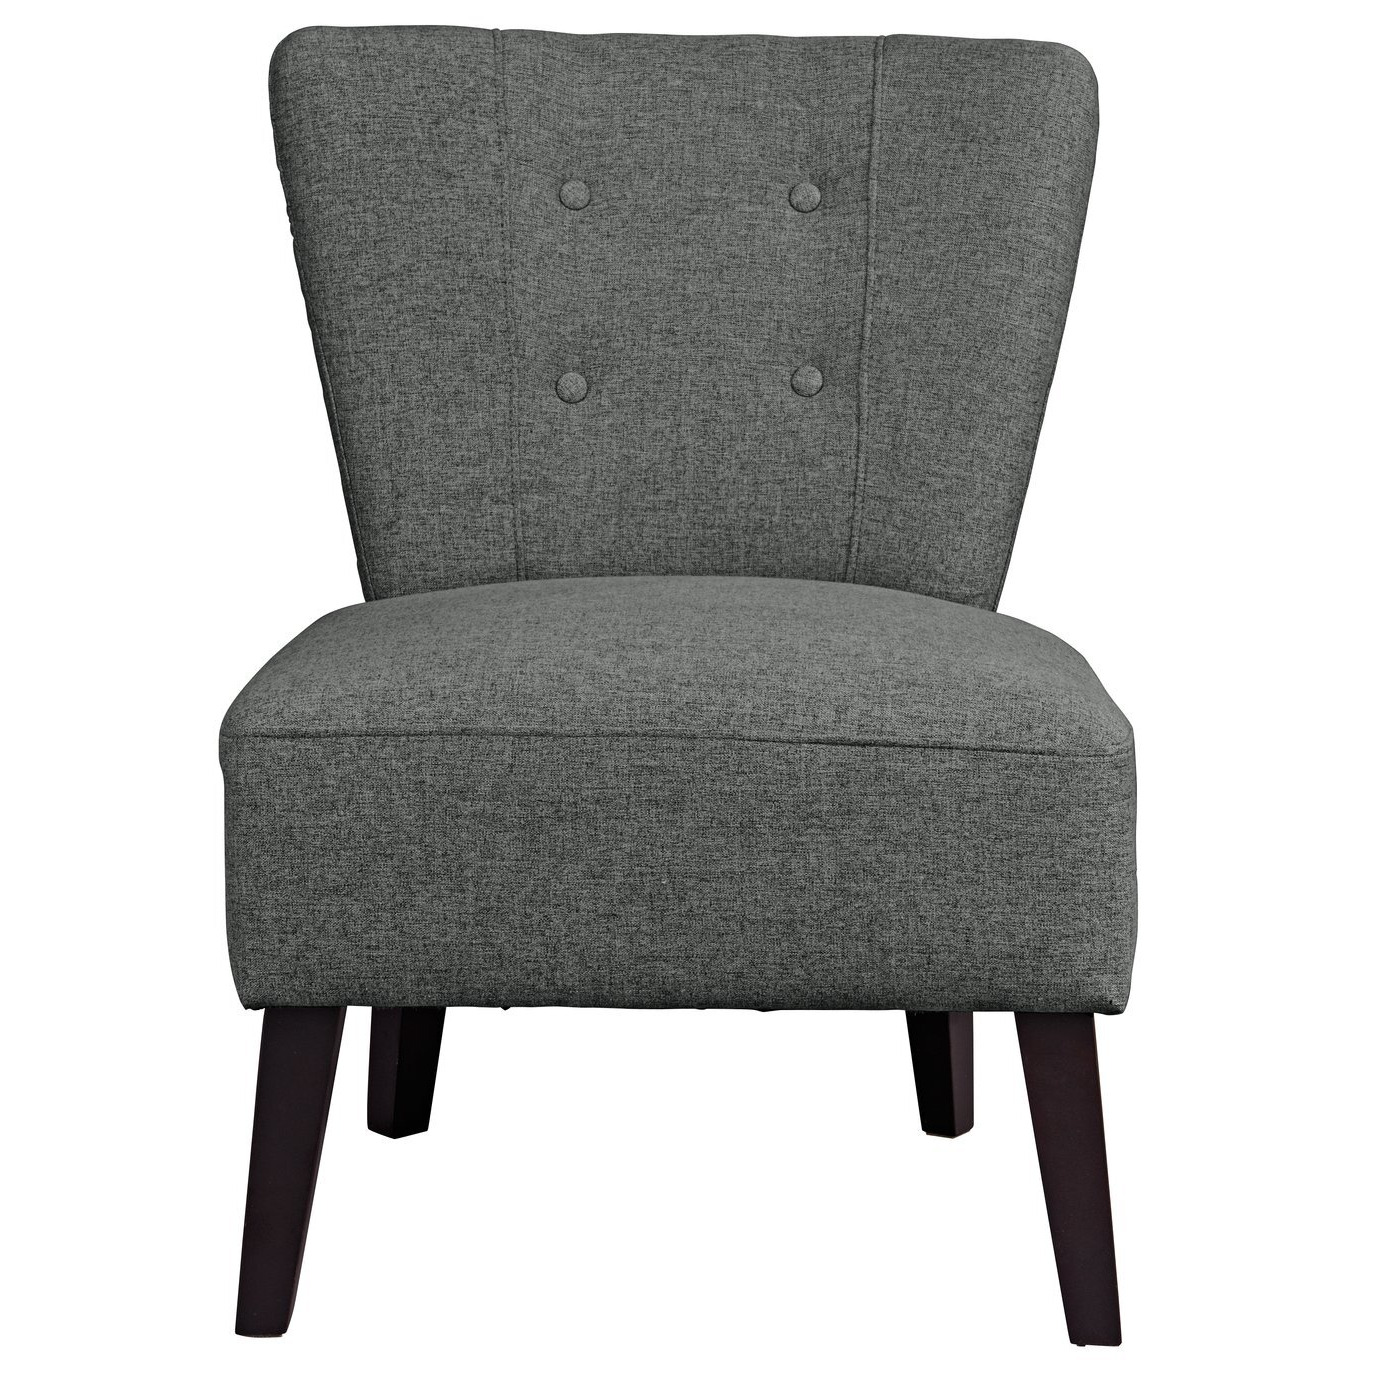 Habitat Delilah Fabric Cocktail Chair - Charcoal - image 1